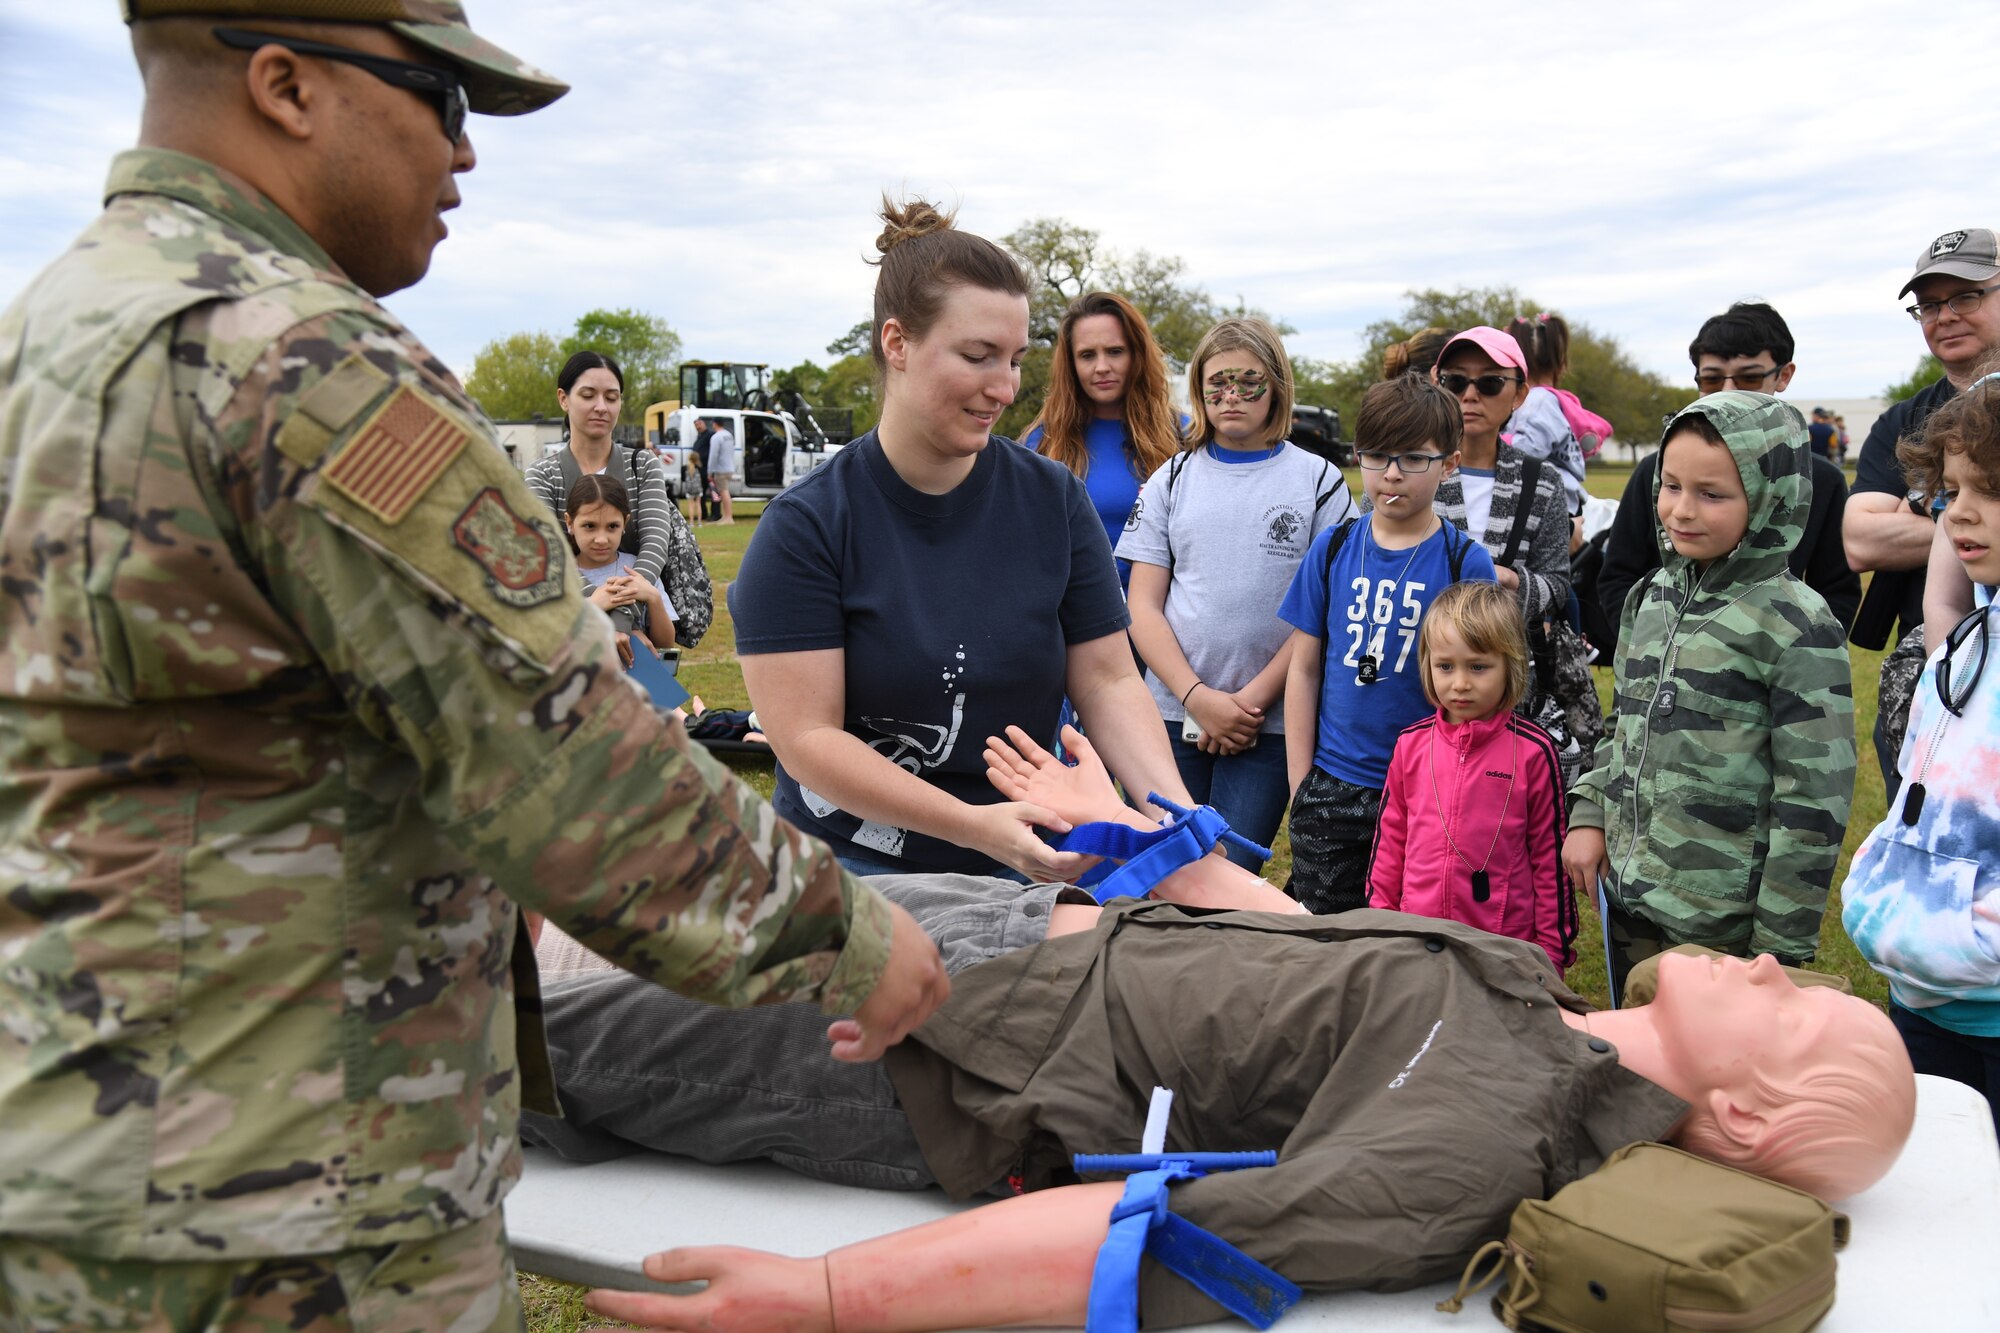 U.S. Air Force Staff Sgt. Donald Mickens, 81st Medical Group life support training section chief, and Staff Sgt. Brittney Park, 81st Medical Support Squadron command support staff NCO in charge, provide a medical triage demonstration during Operation Hero at Keesler Air Force Base, Mississippi, April 2, 2022. The event, hosted by the Airman and Family Readiness Center in recognition of the Month of the Military Child, gave military children a glimpse into the lives of deployed military members. Children received Operation Hero dog tags and t-shirts as they made their way through a mock deployment line as well as the opportunity to experience a military working dog demonstration and have their faces painted. (U.S. Air Force photo by Kemberly Groue)